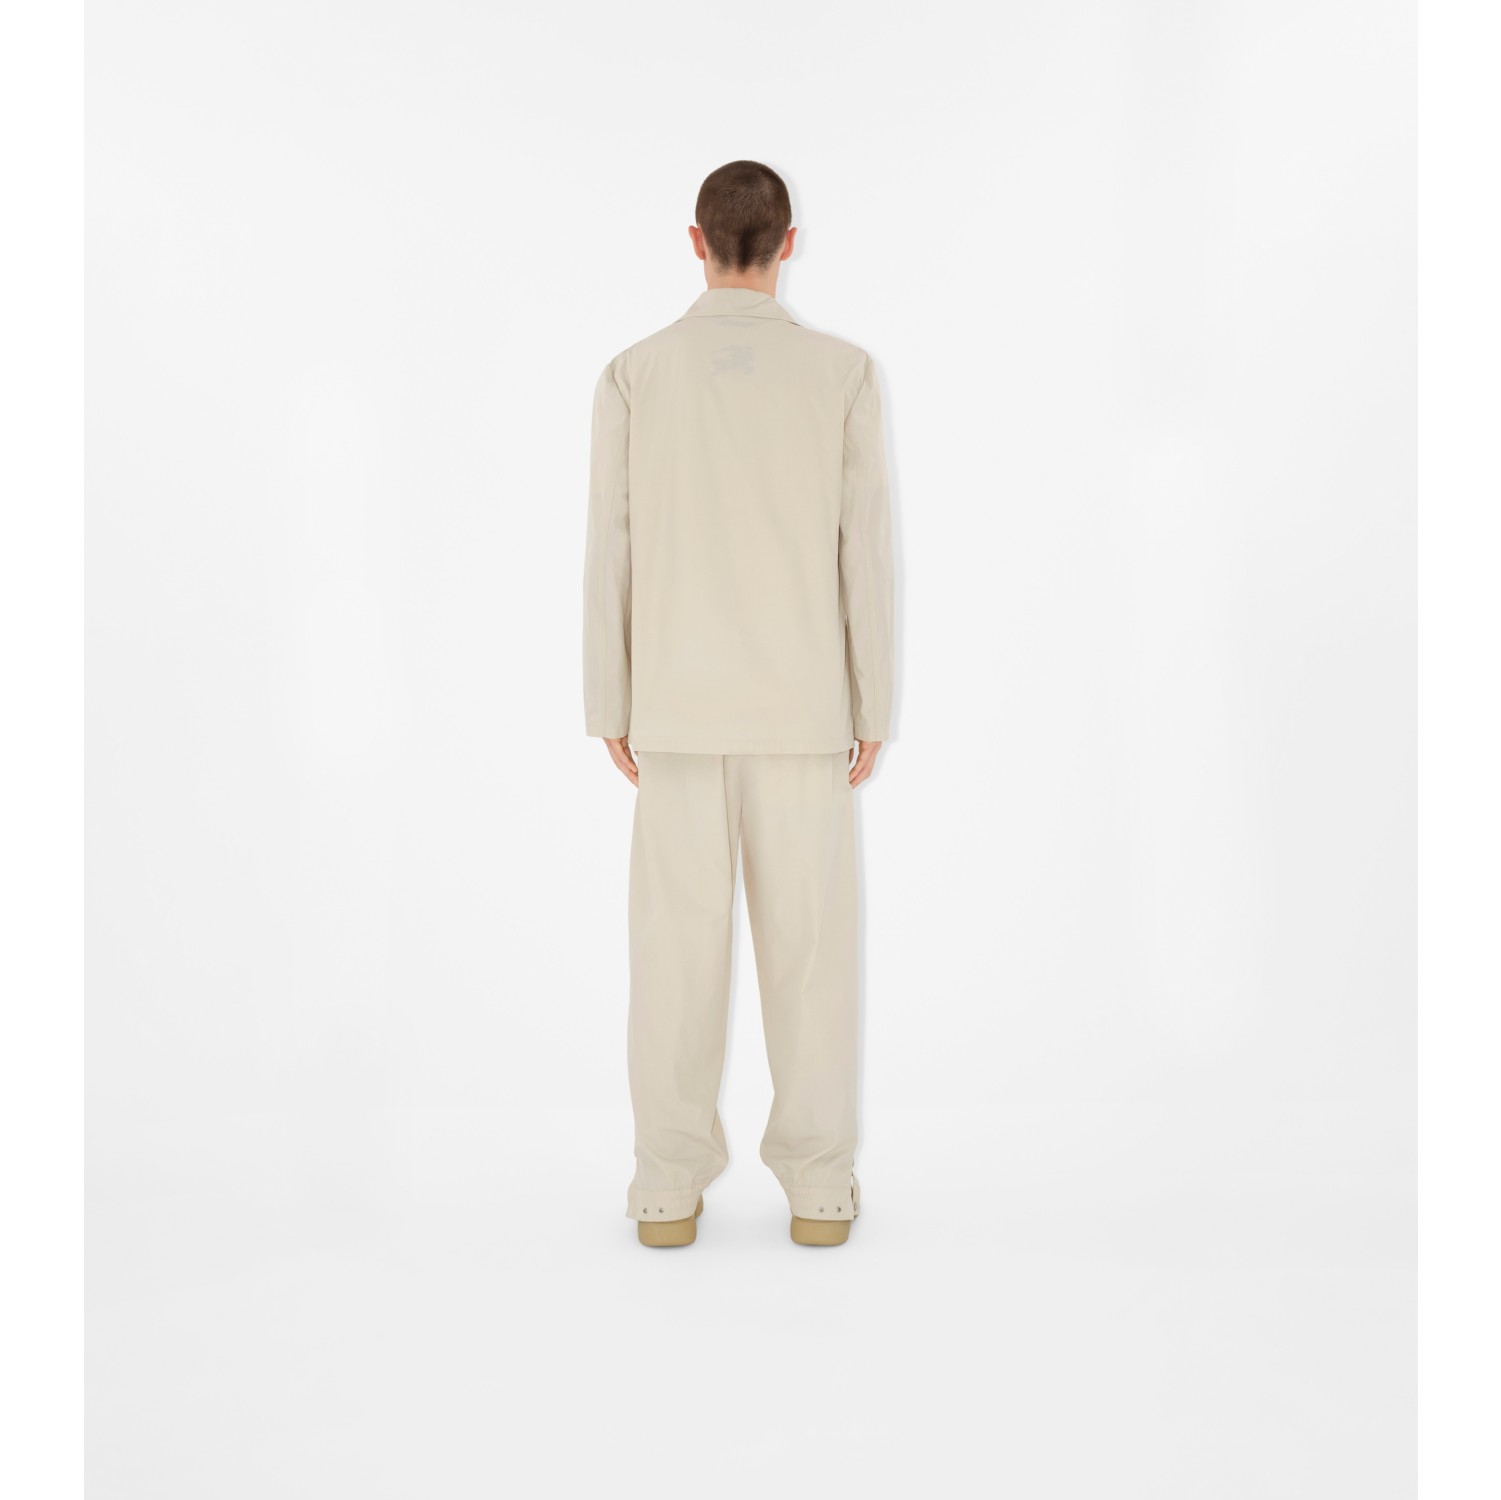 Cotton Blend Tailored Trousers